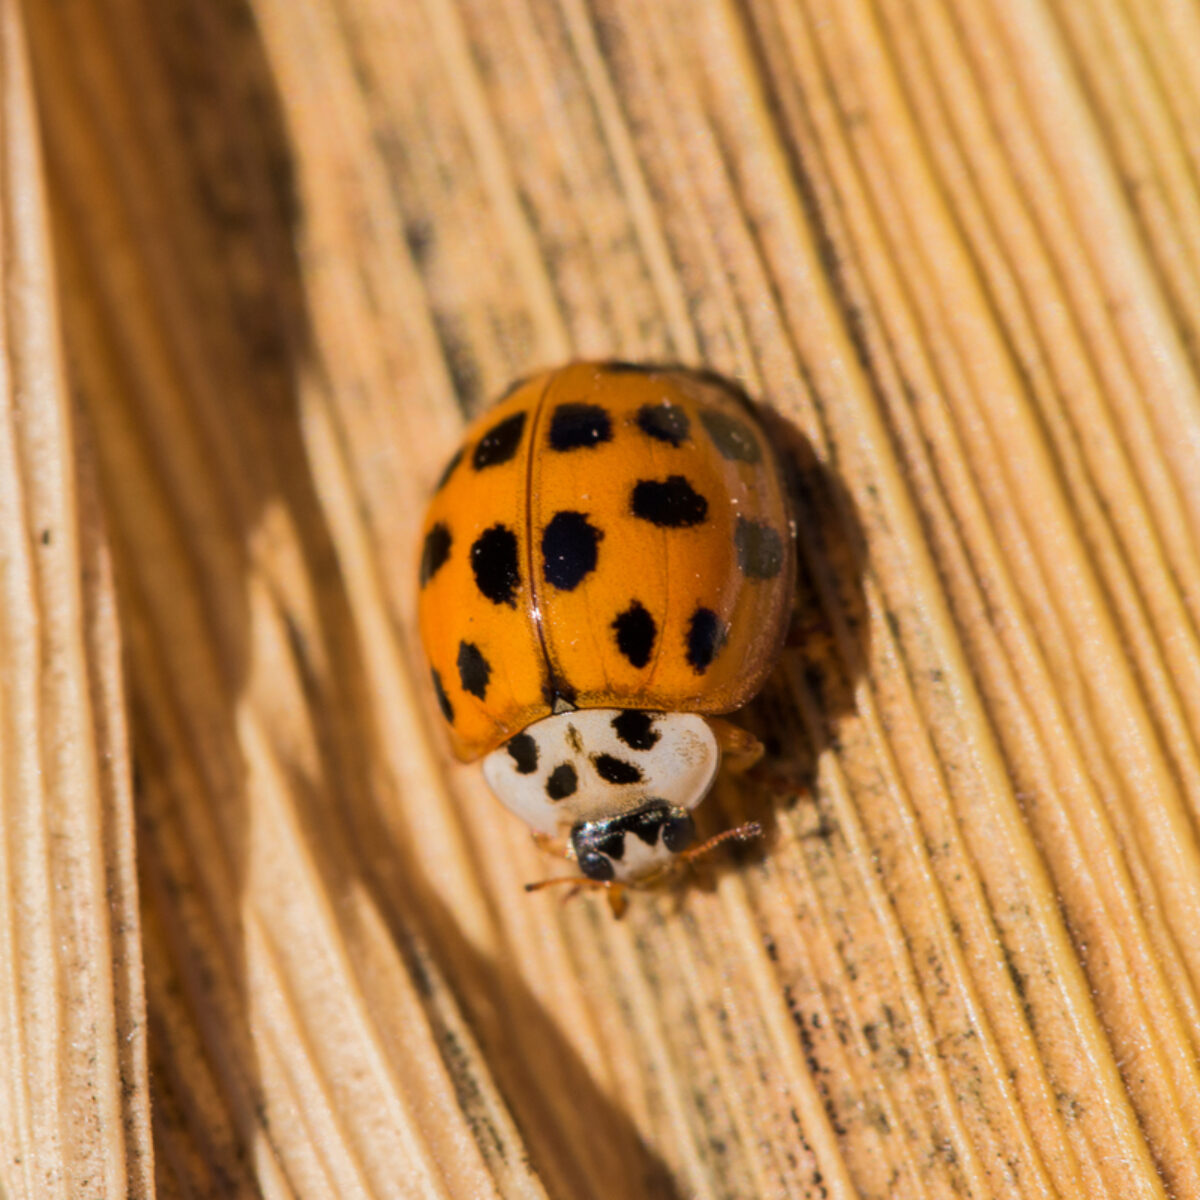 Asian Lady Beetle Control: Keeping These Critters Outside